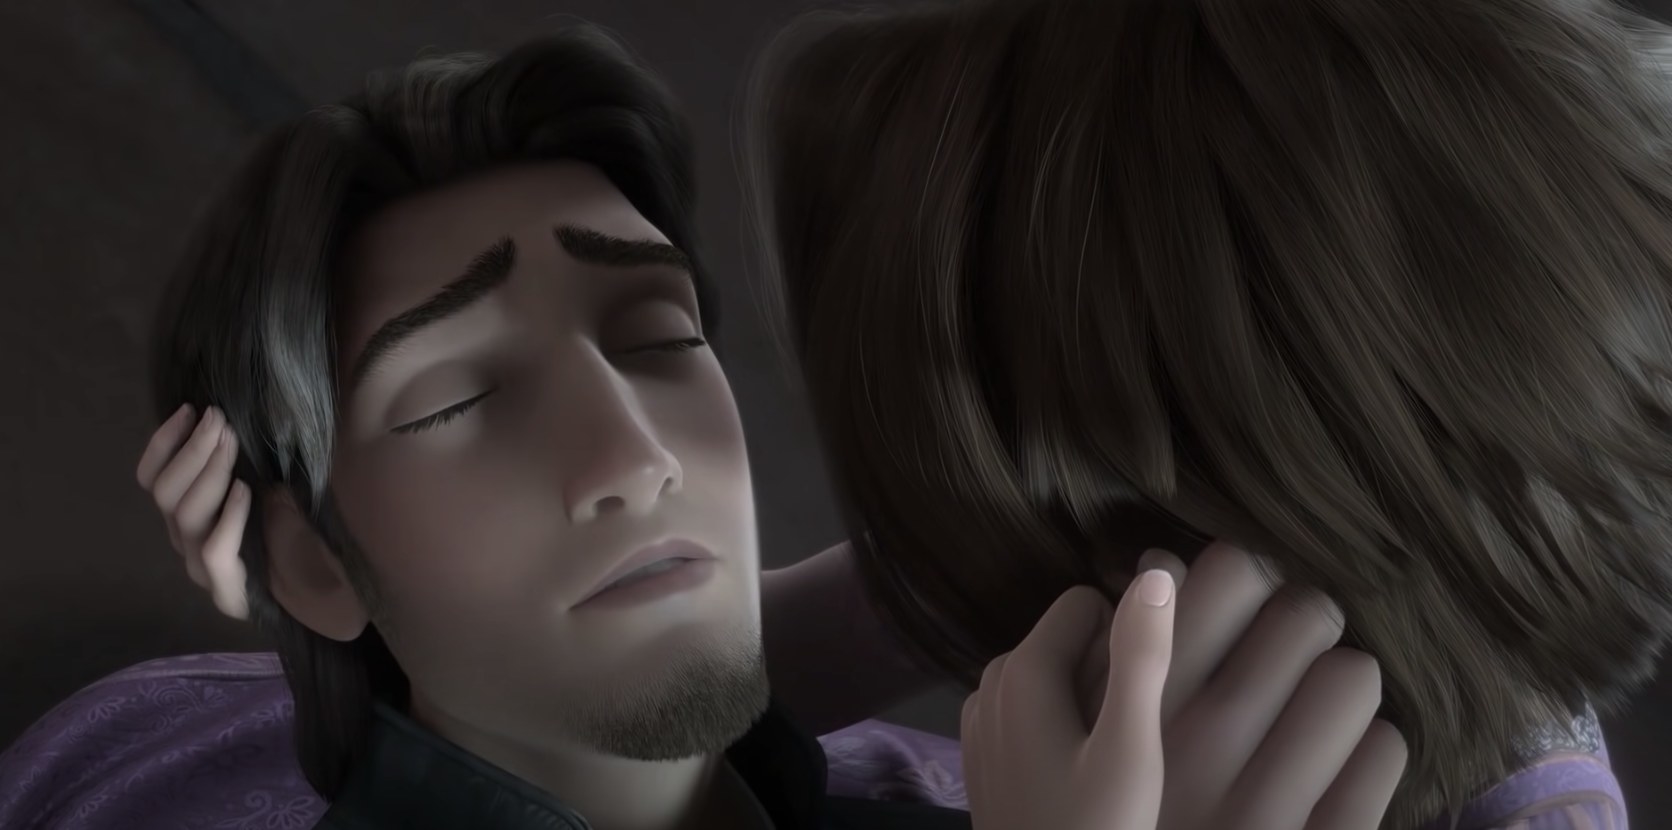 Flynn Rider dying in the arms of Rapunzel